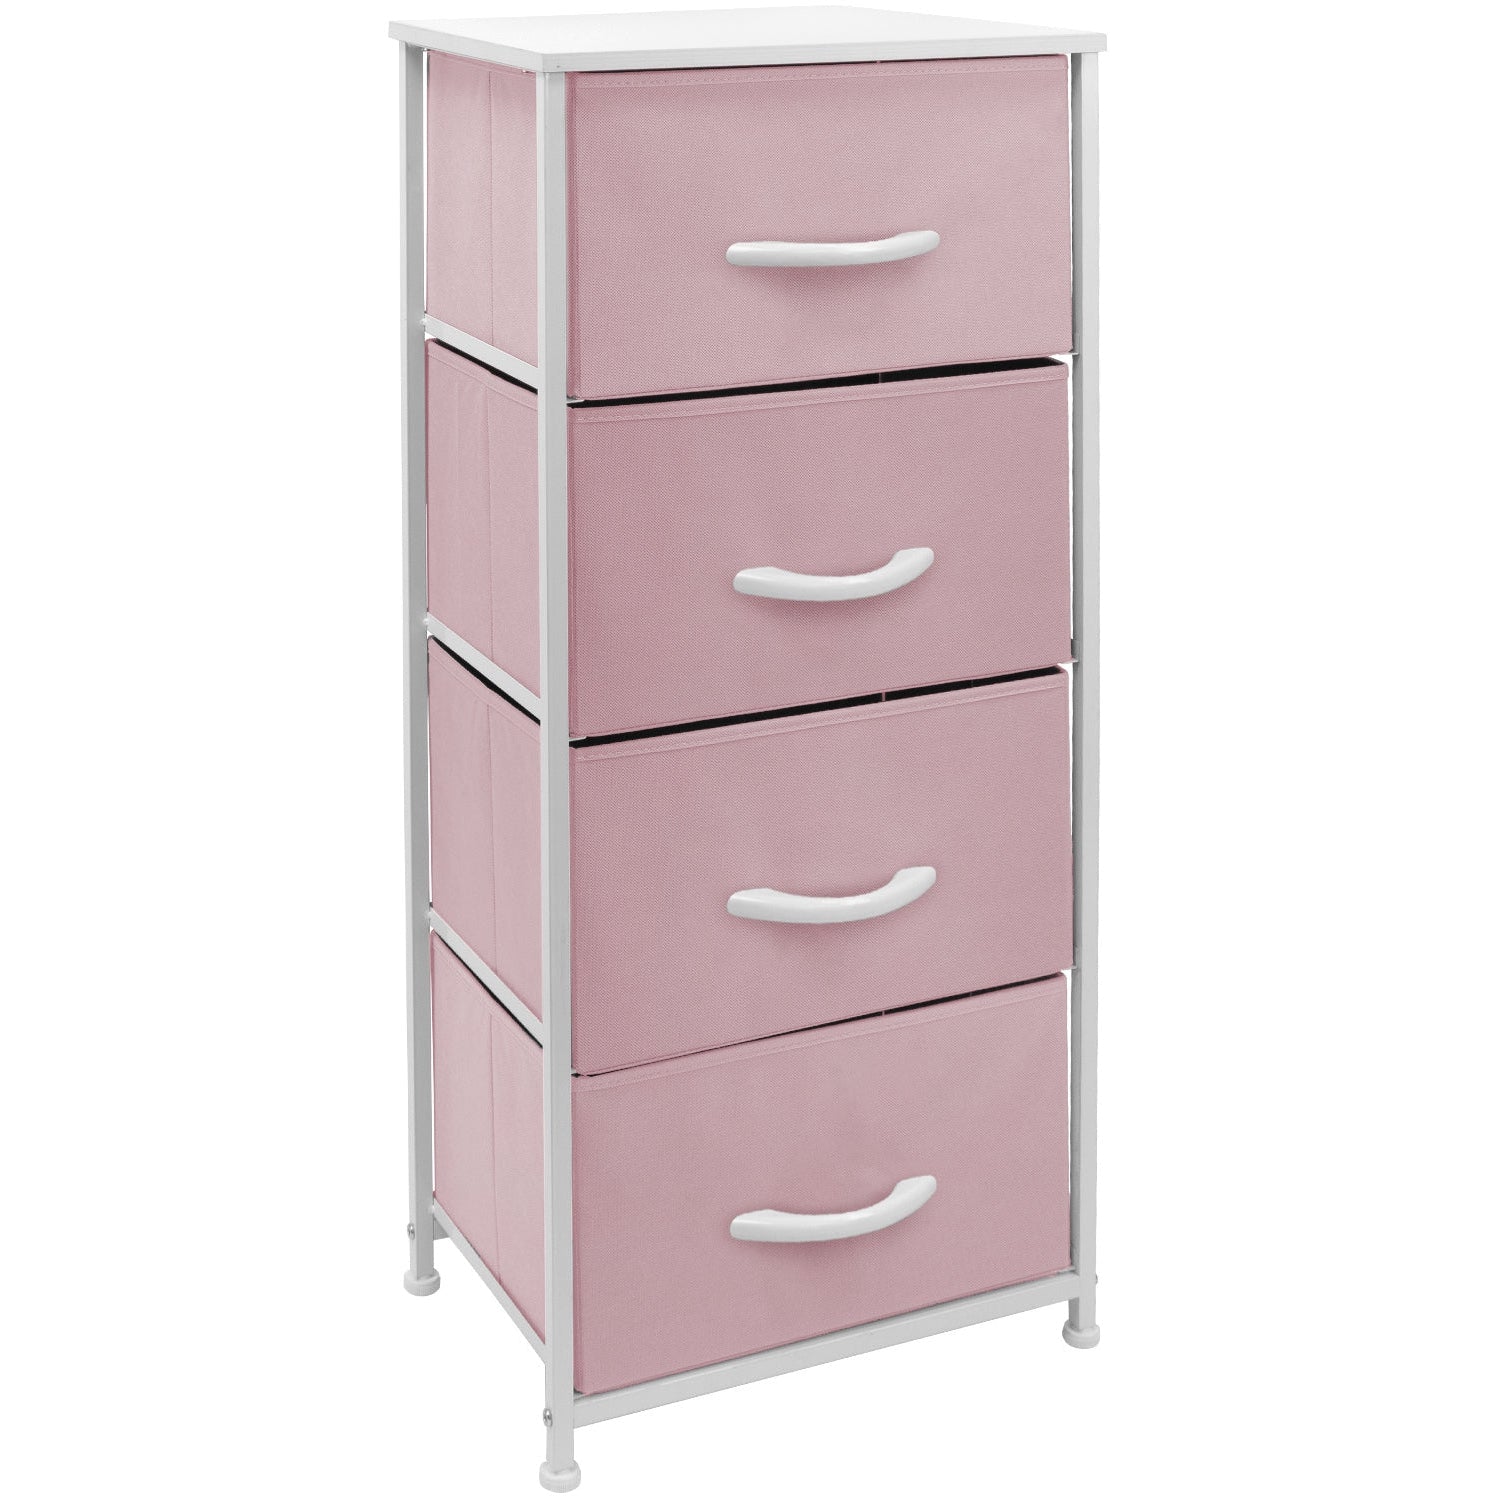 4-Drawer Nightstand (Pastel Colors)